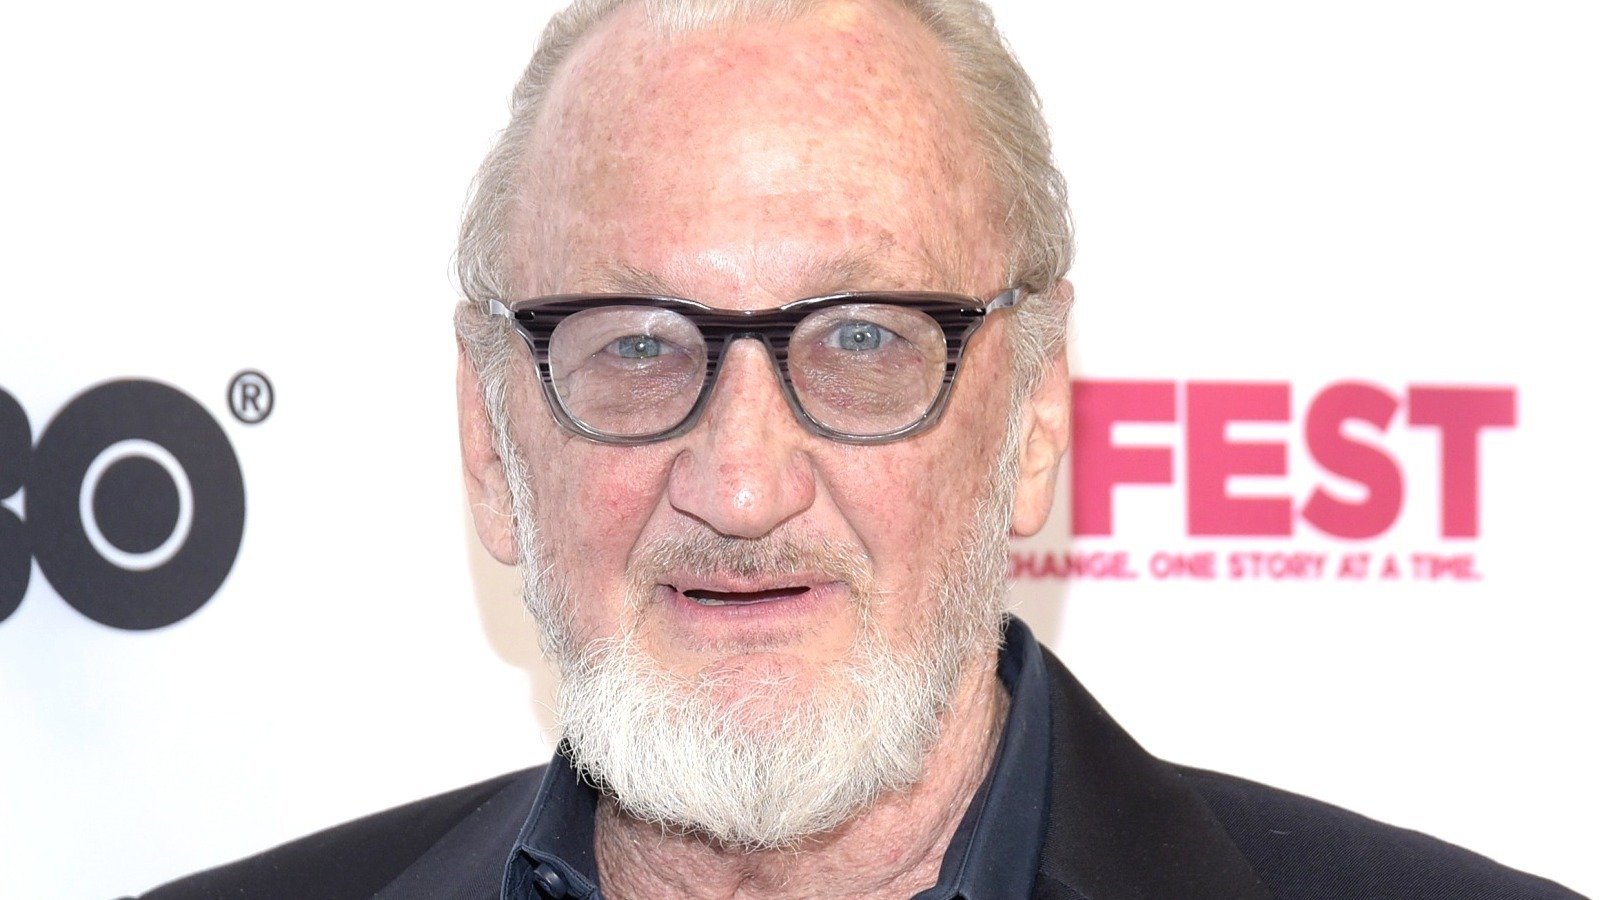 The Hilarious Way Robert Englund Landed His Stranger Things Role